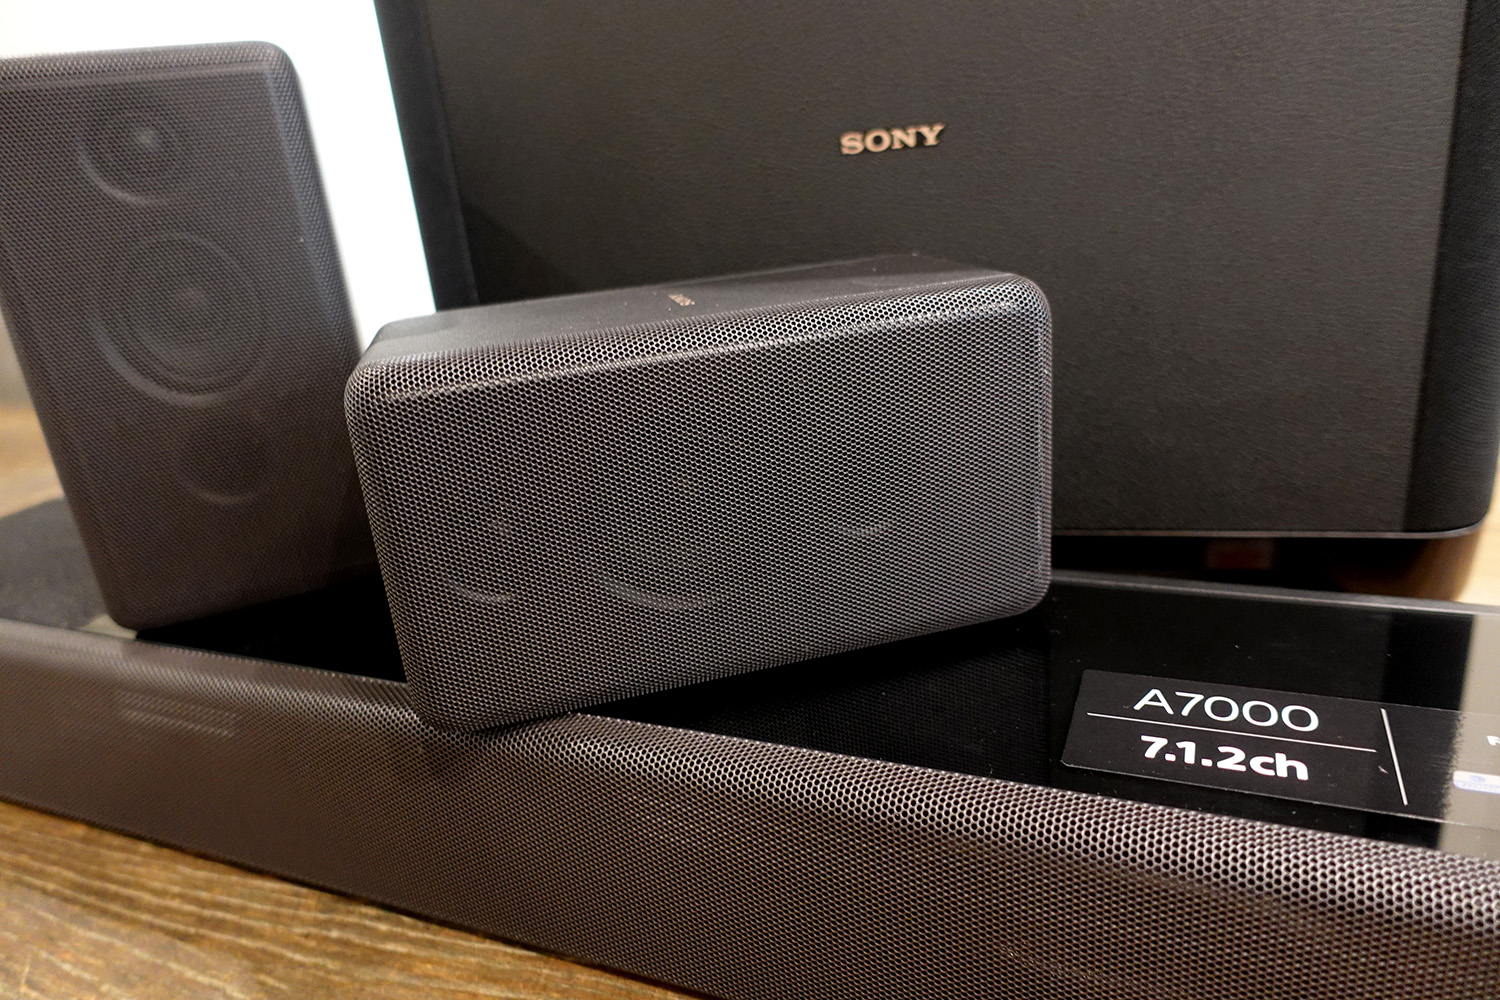 Sony HT-A7000 Sound Bar system review